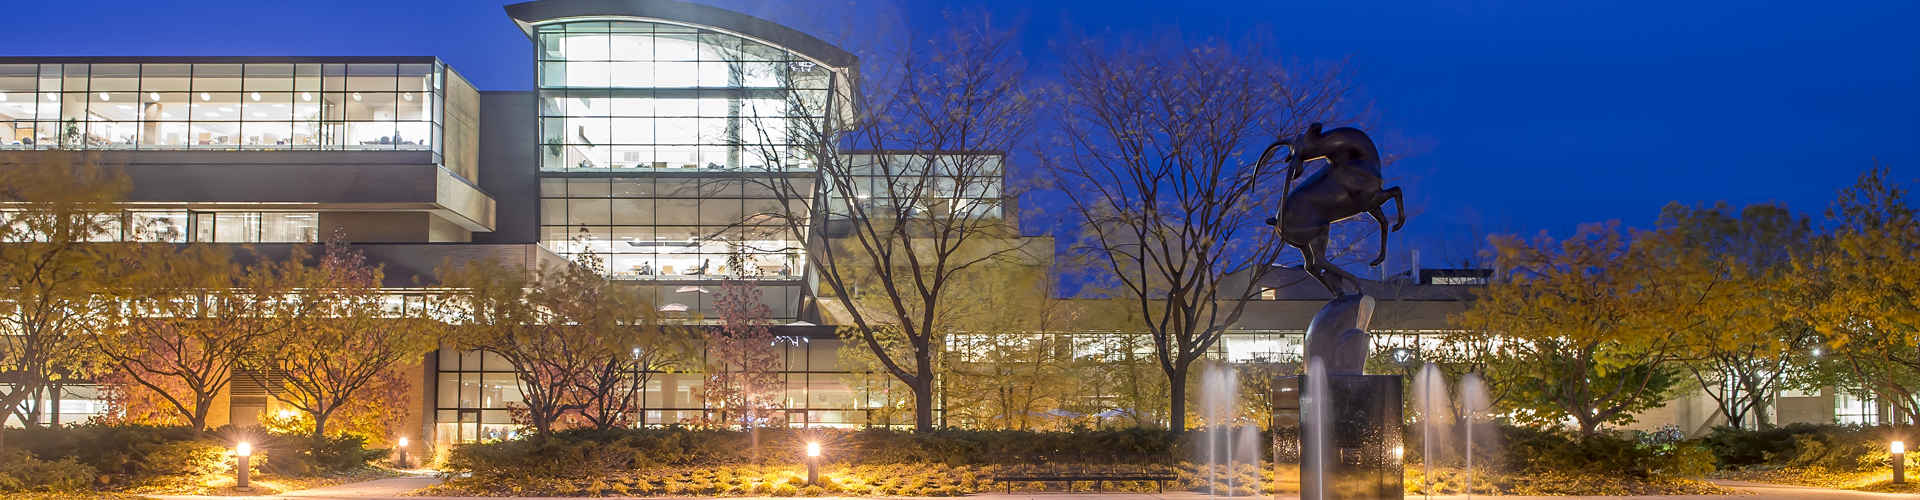 Exterior of Zahnow Library at night